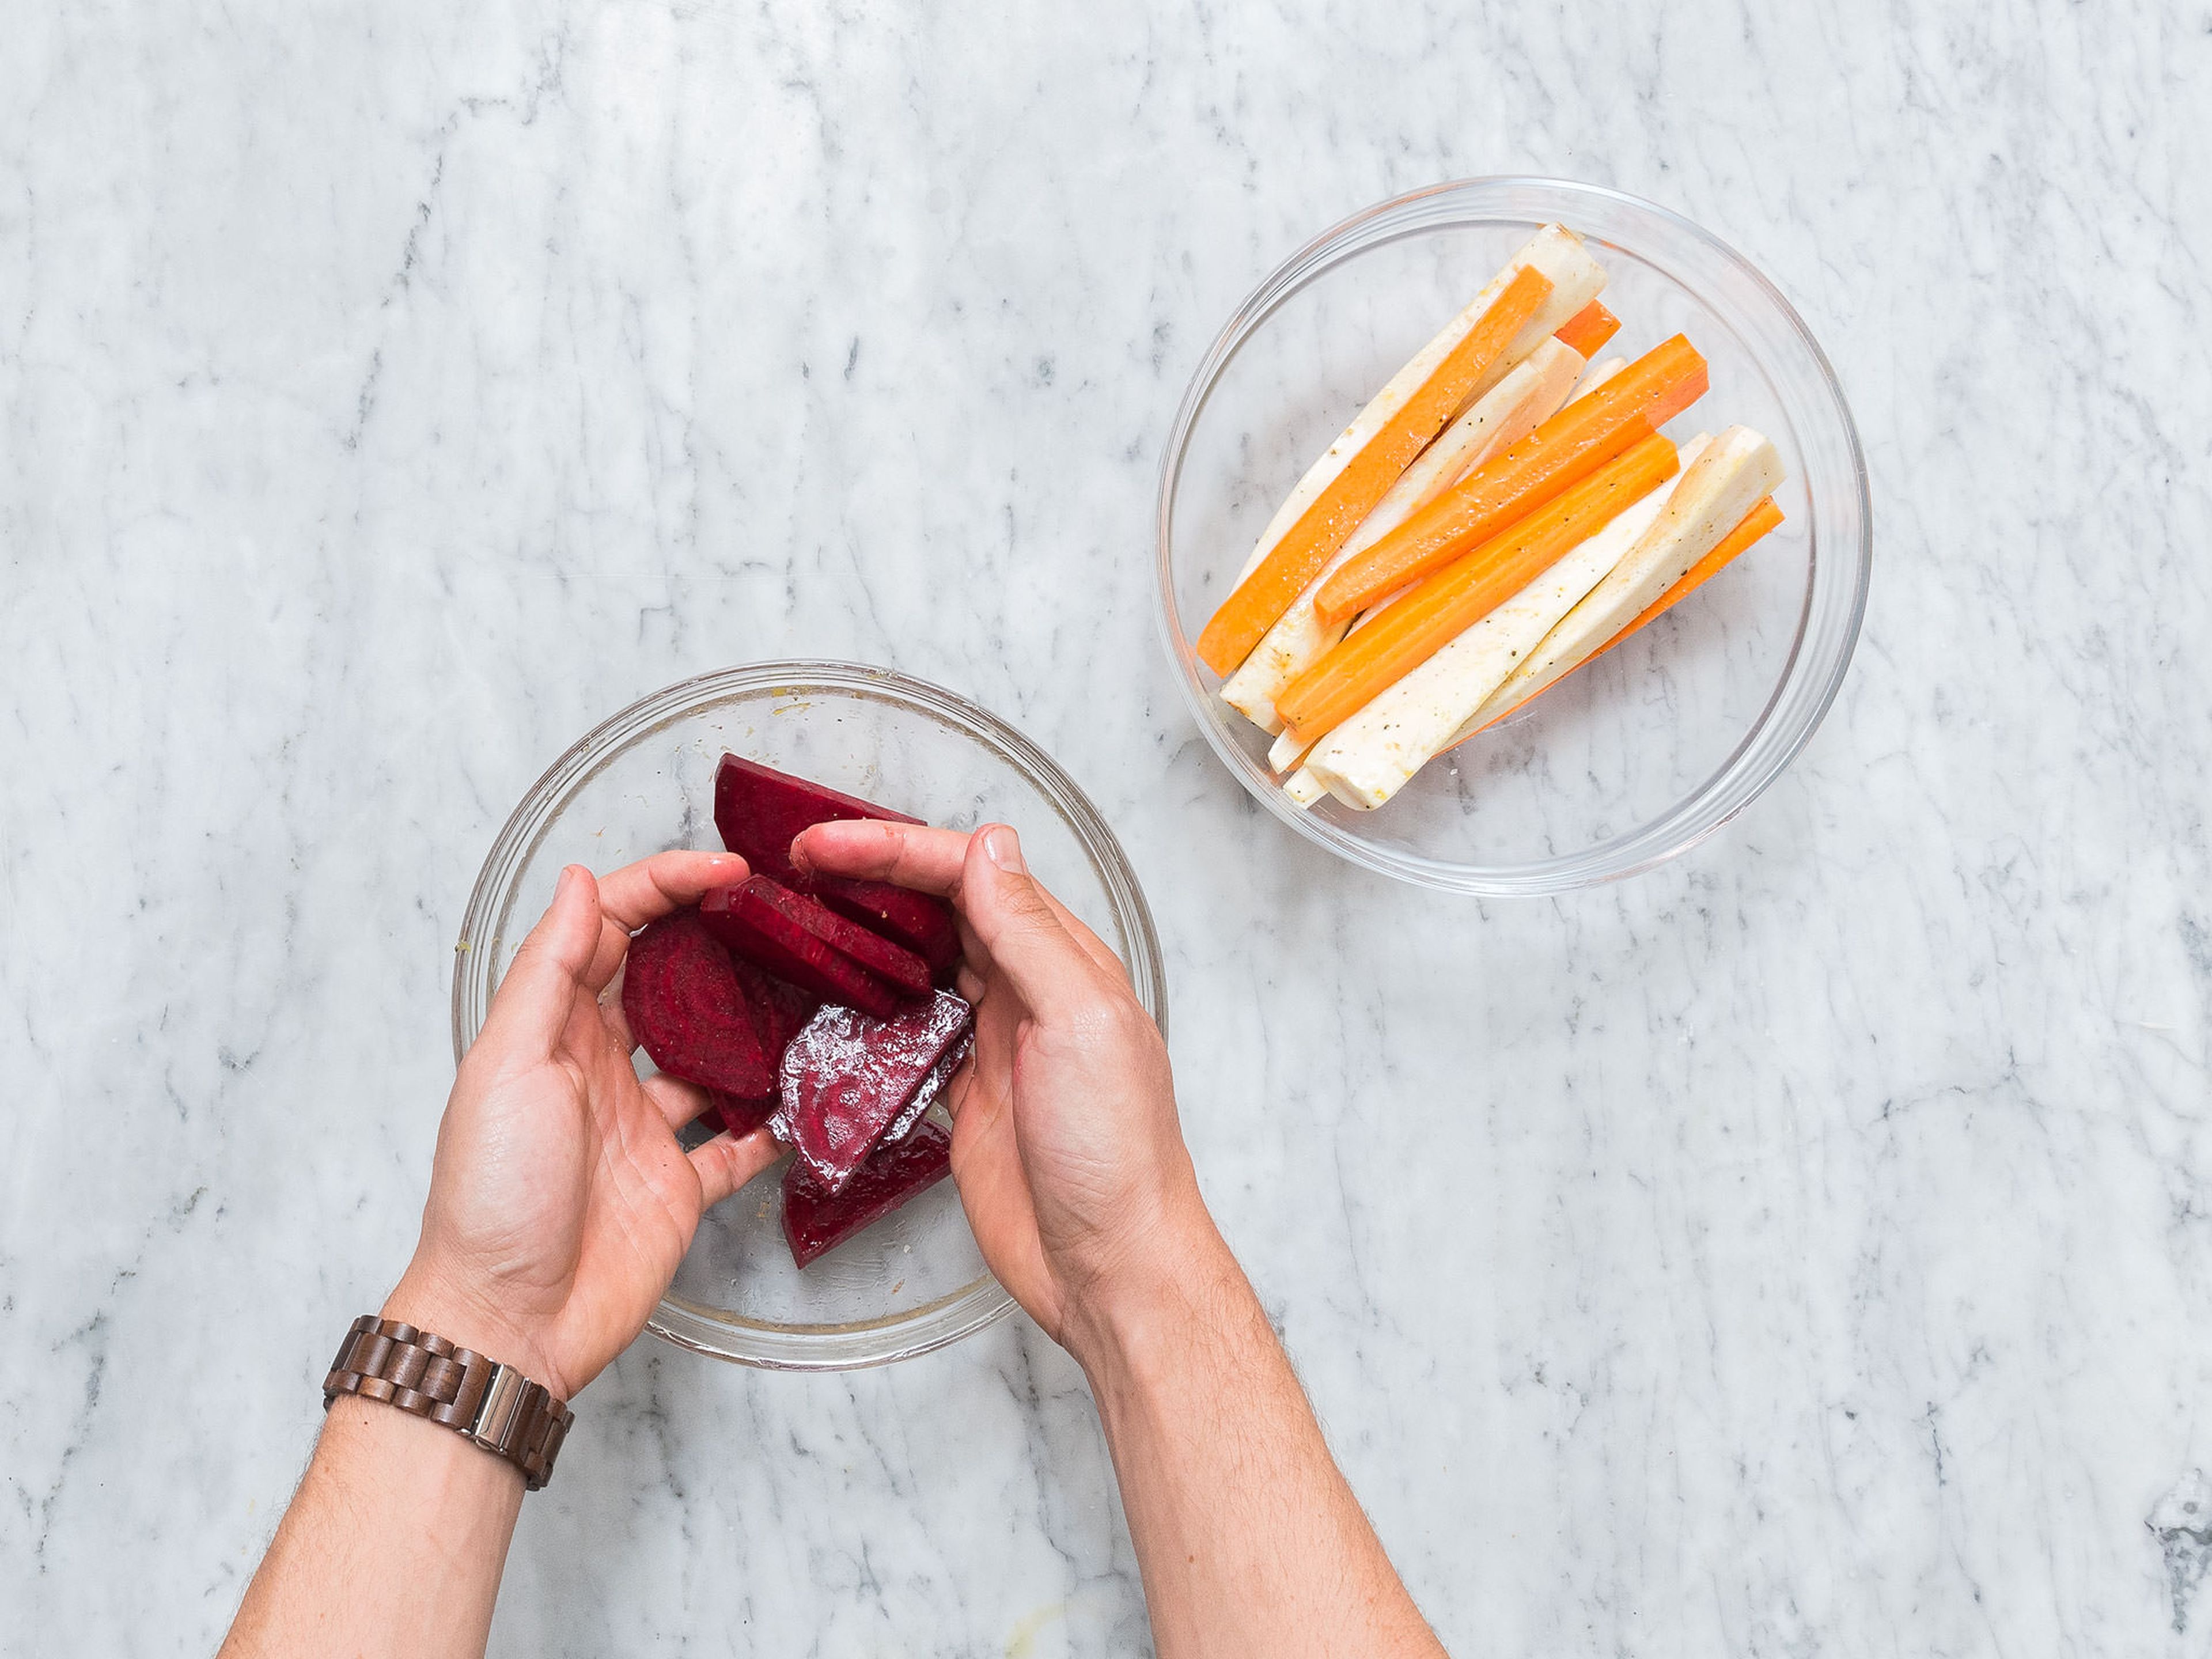 Pre-heat oven to 200°C/390°F. Peel carrots and parsnips and quarter them lengthwise. Peel and halve beetroot, then cut into 1-cm/0.4-in. slices. In a bowl, combine the vegetables with lemon zest and olive oil. Season with salt and pepper.